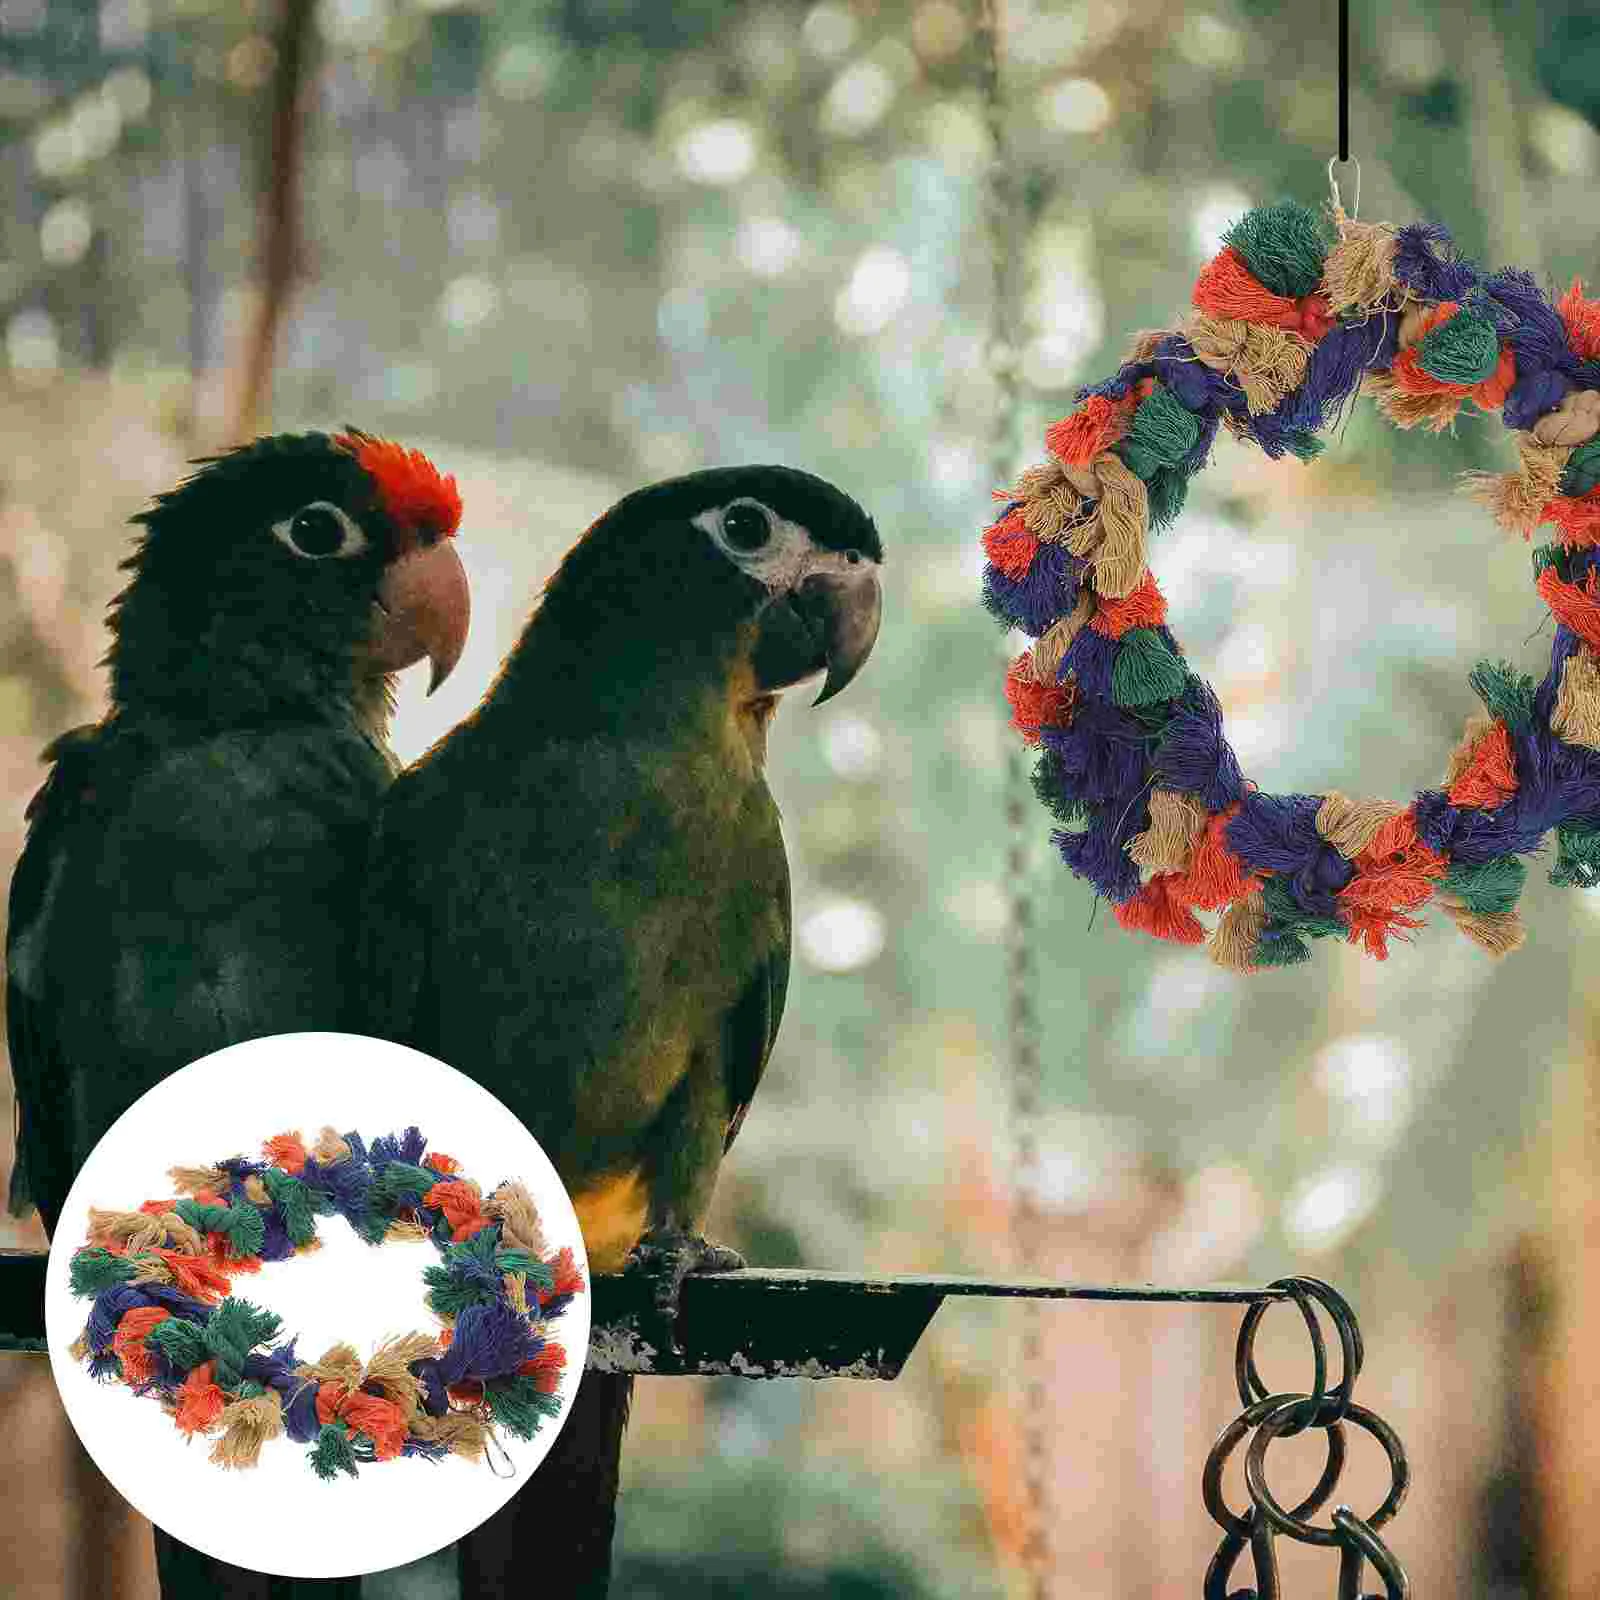 

Parrot Swing Bird Toys Toy Hanging Rope Bite Chewing Swings Chew Hammock Budgie Parakeet Cage Perch Ornament Wreath Bar Ladders